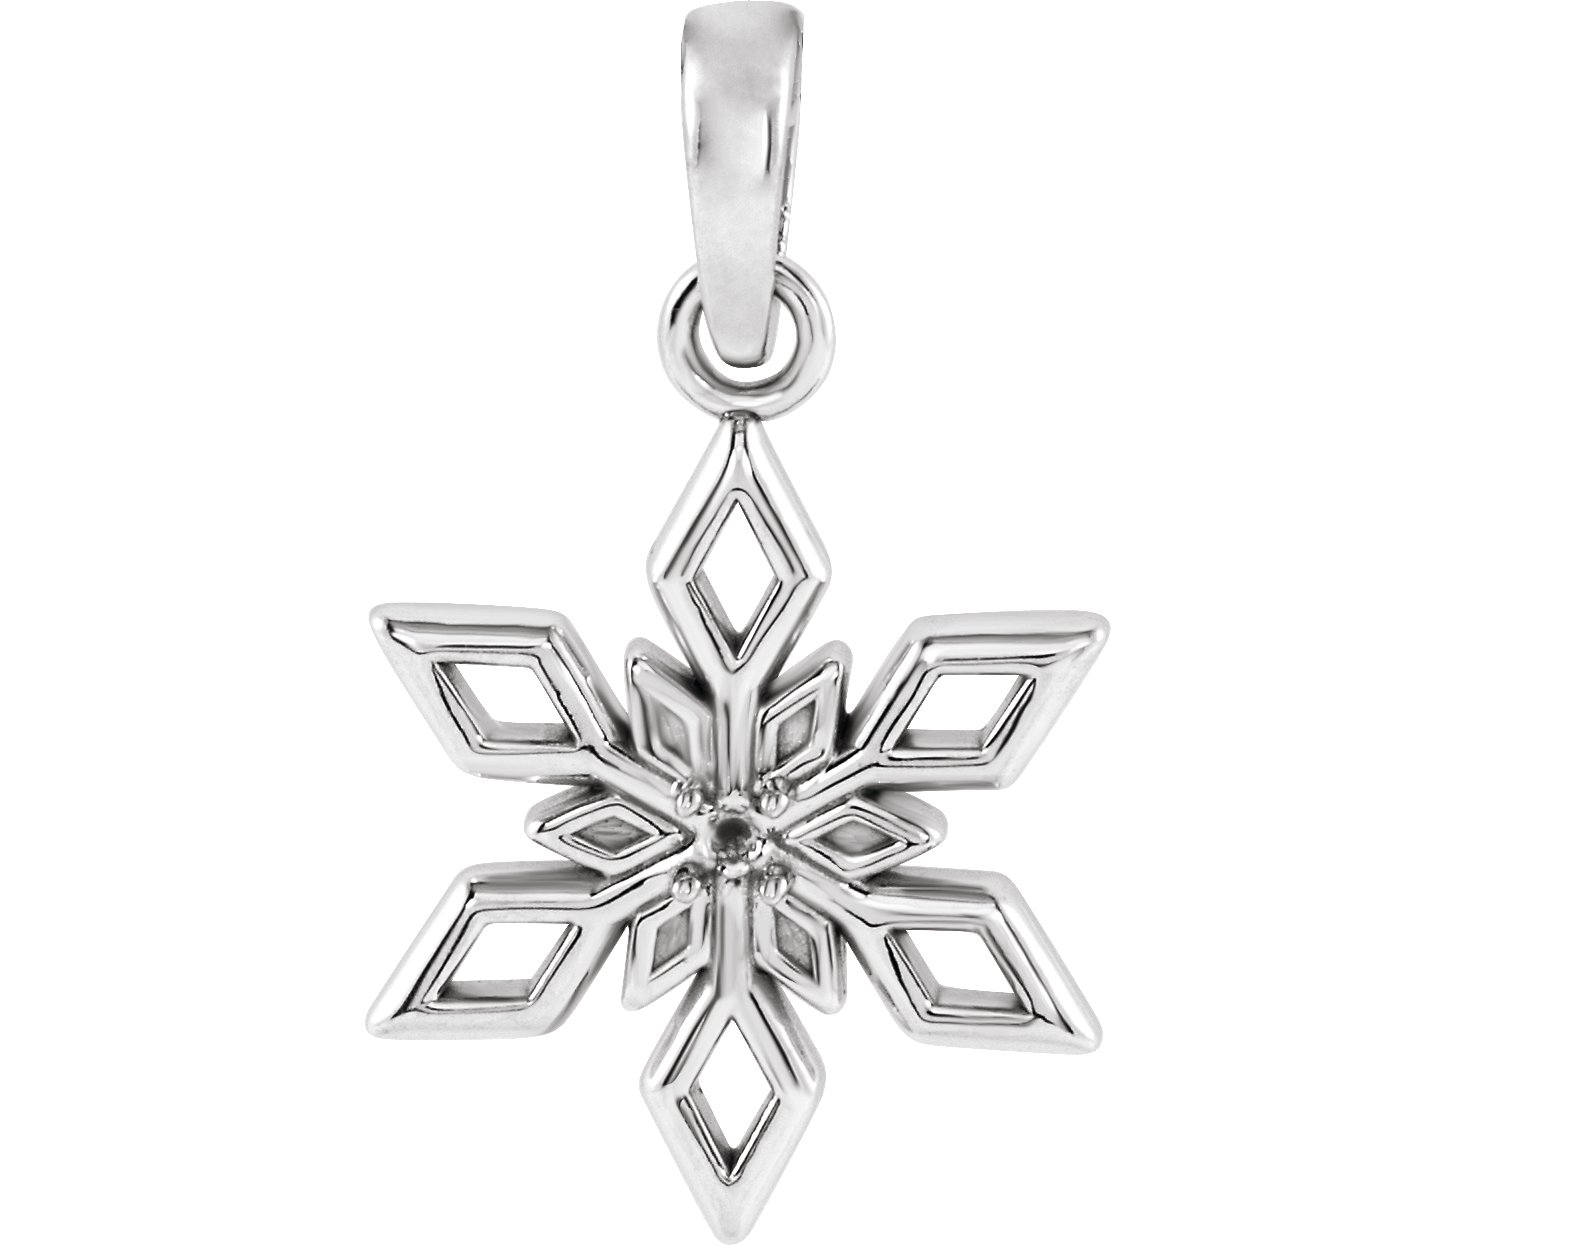 Snowflake Necklace or Pendant